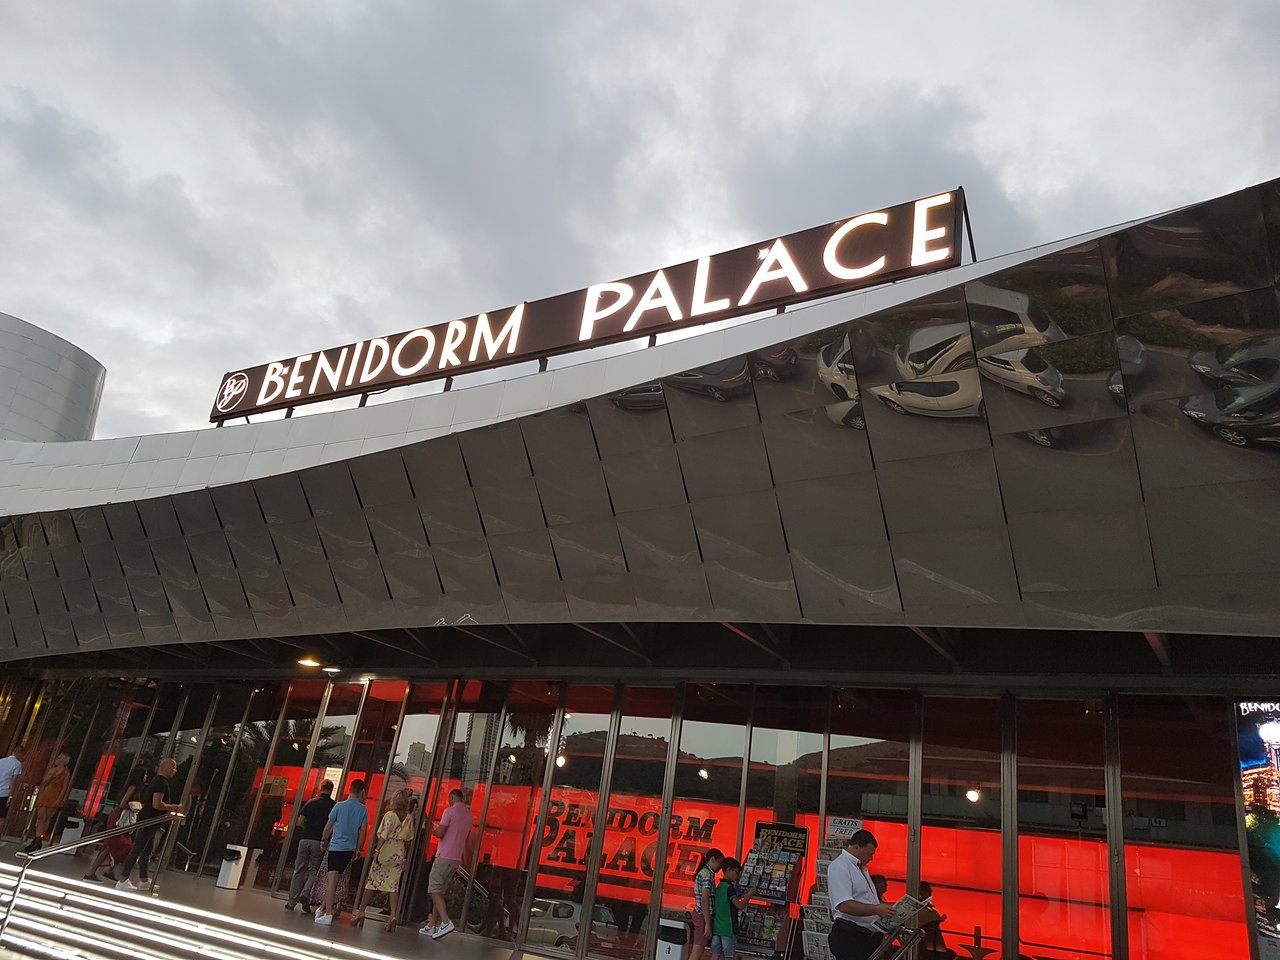 14-surprising-facts-about-benidorm-palace